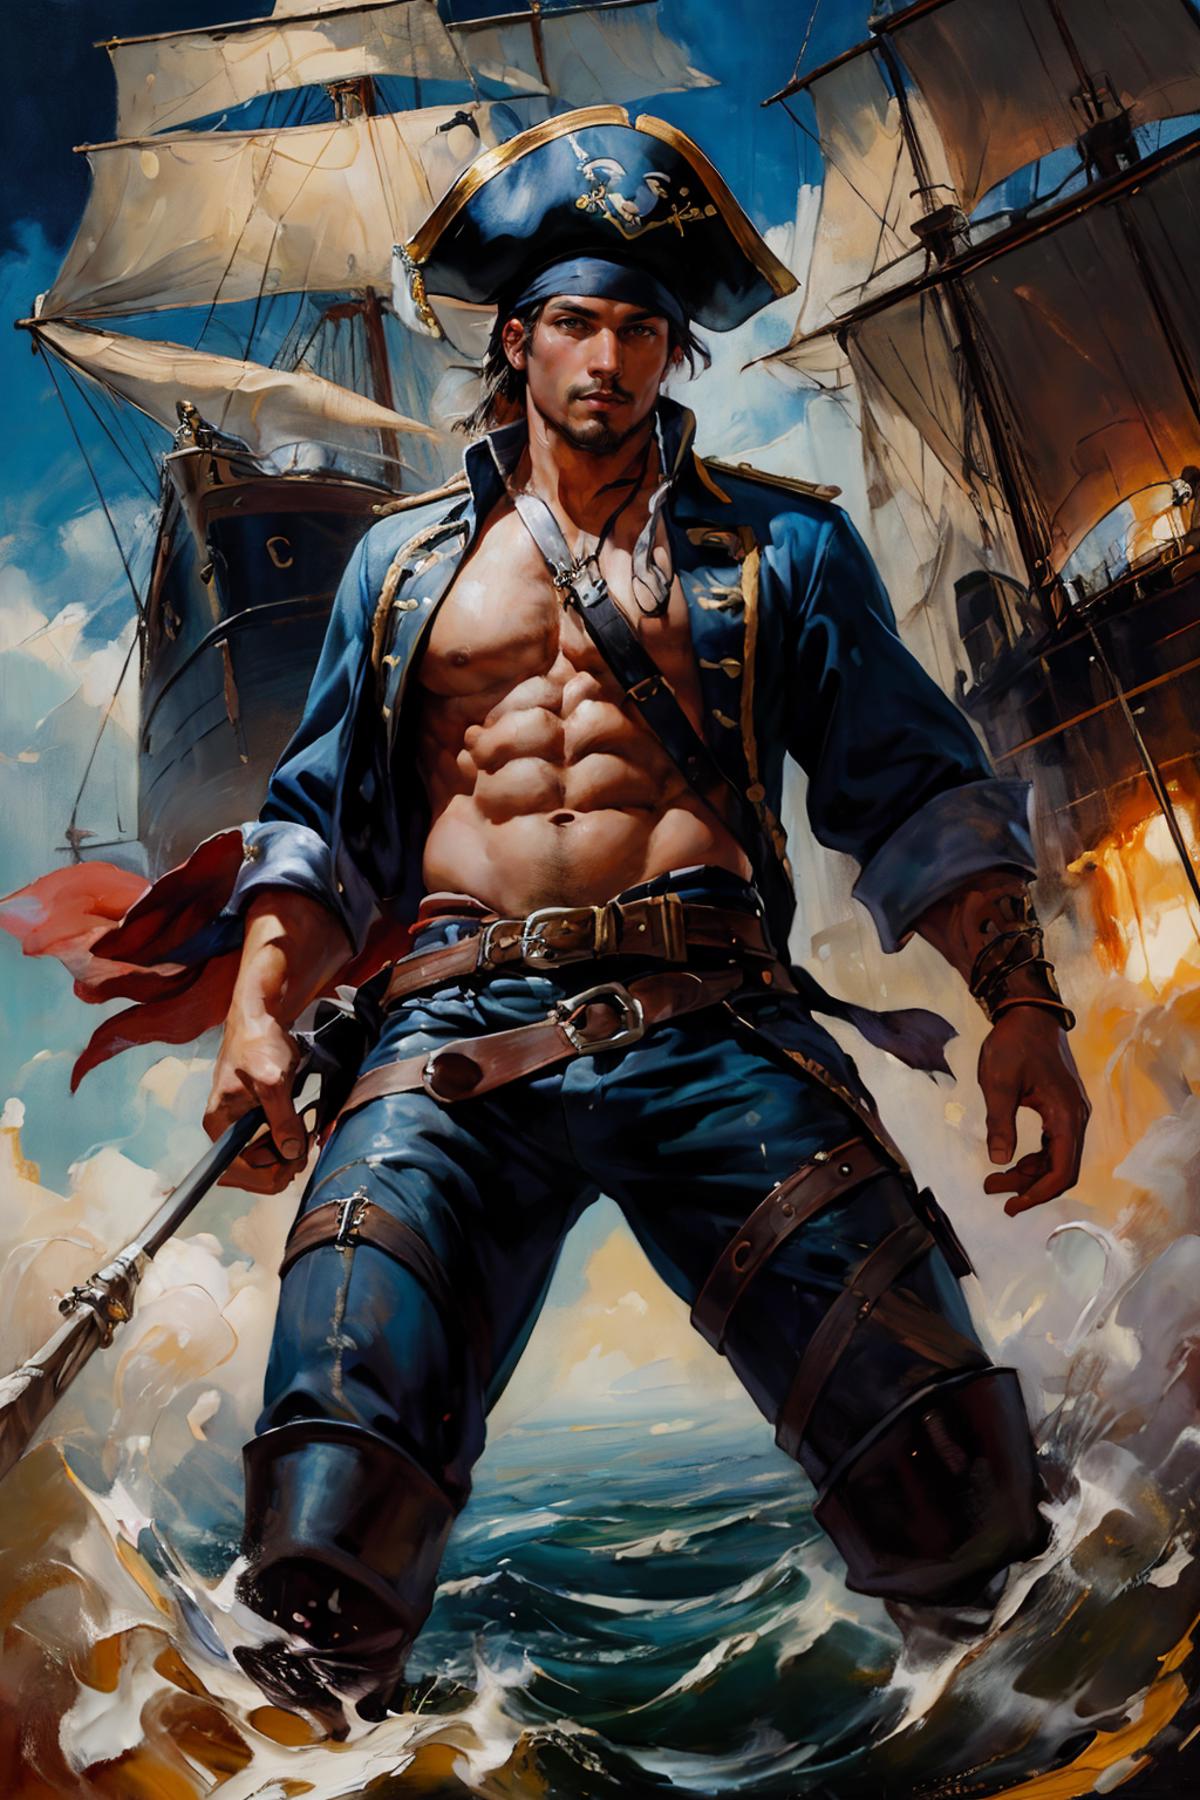 A Shirtless Pirate with a Saber and Gun in His Hand.